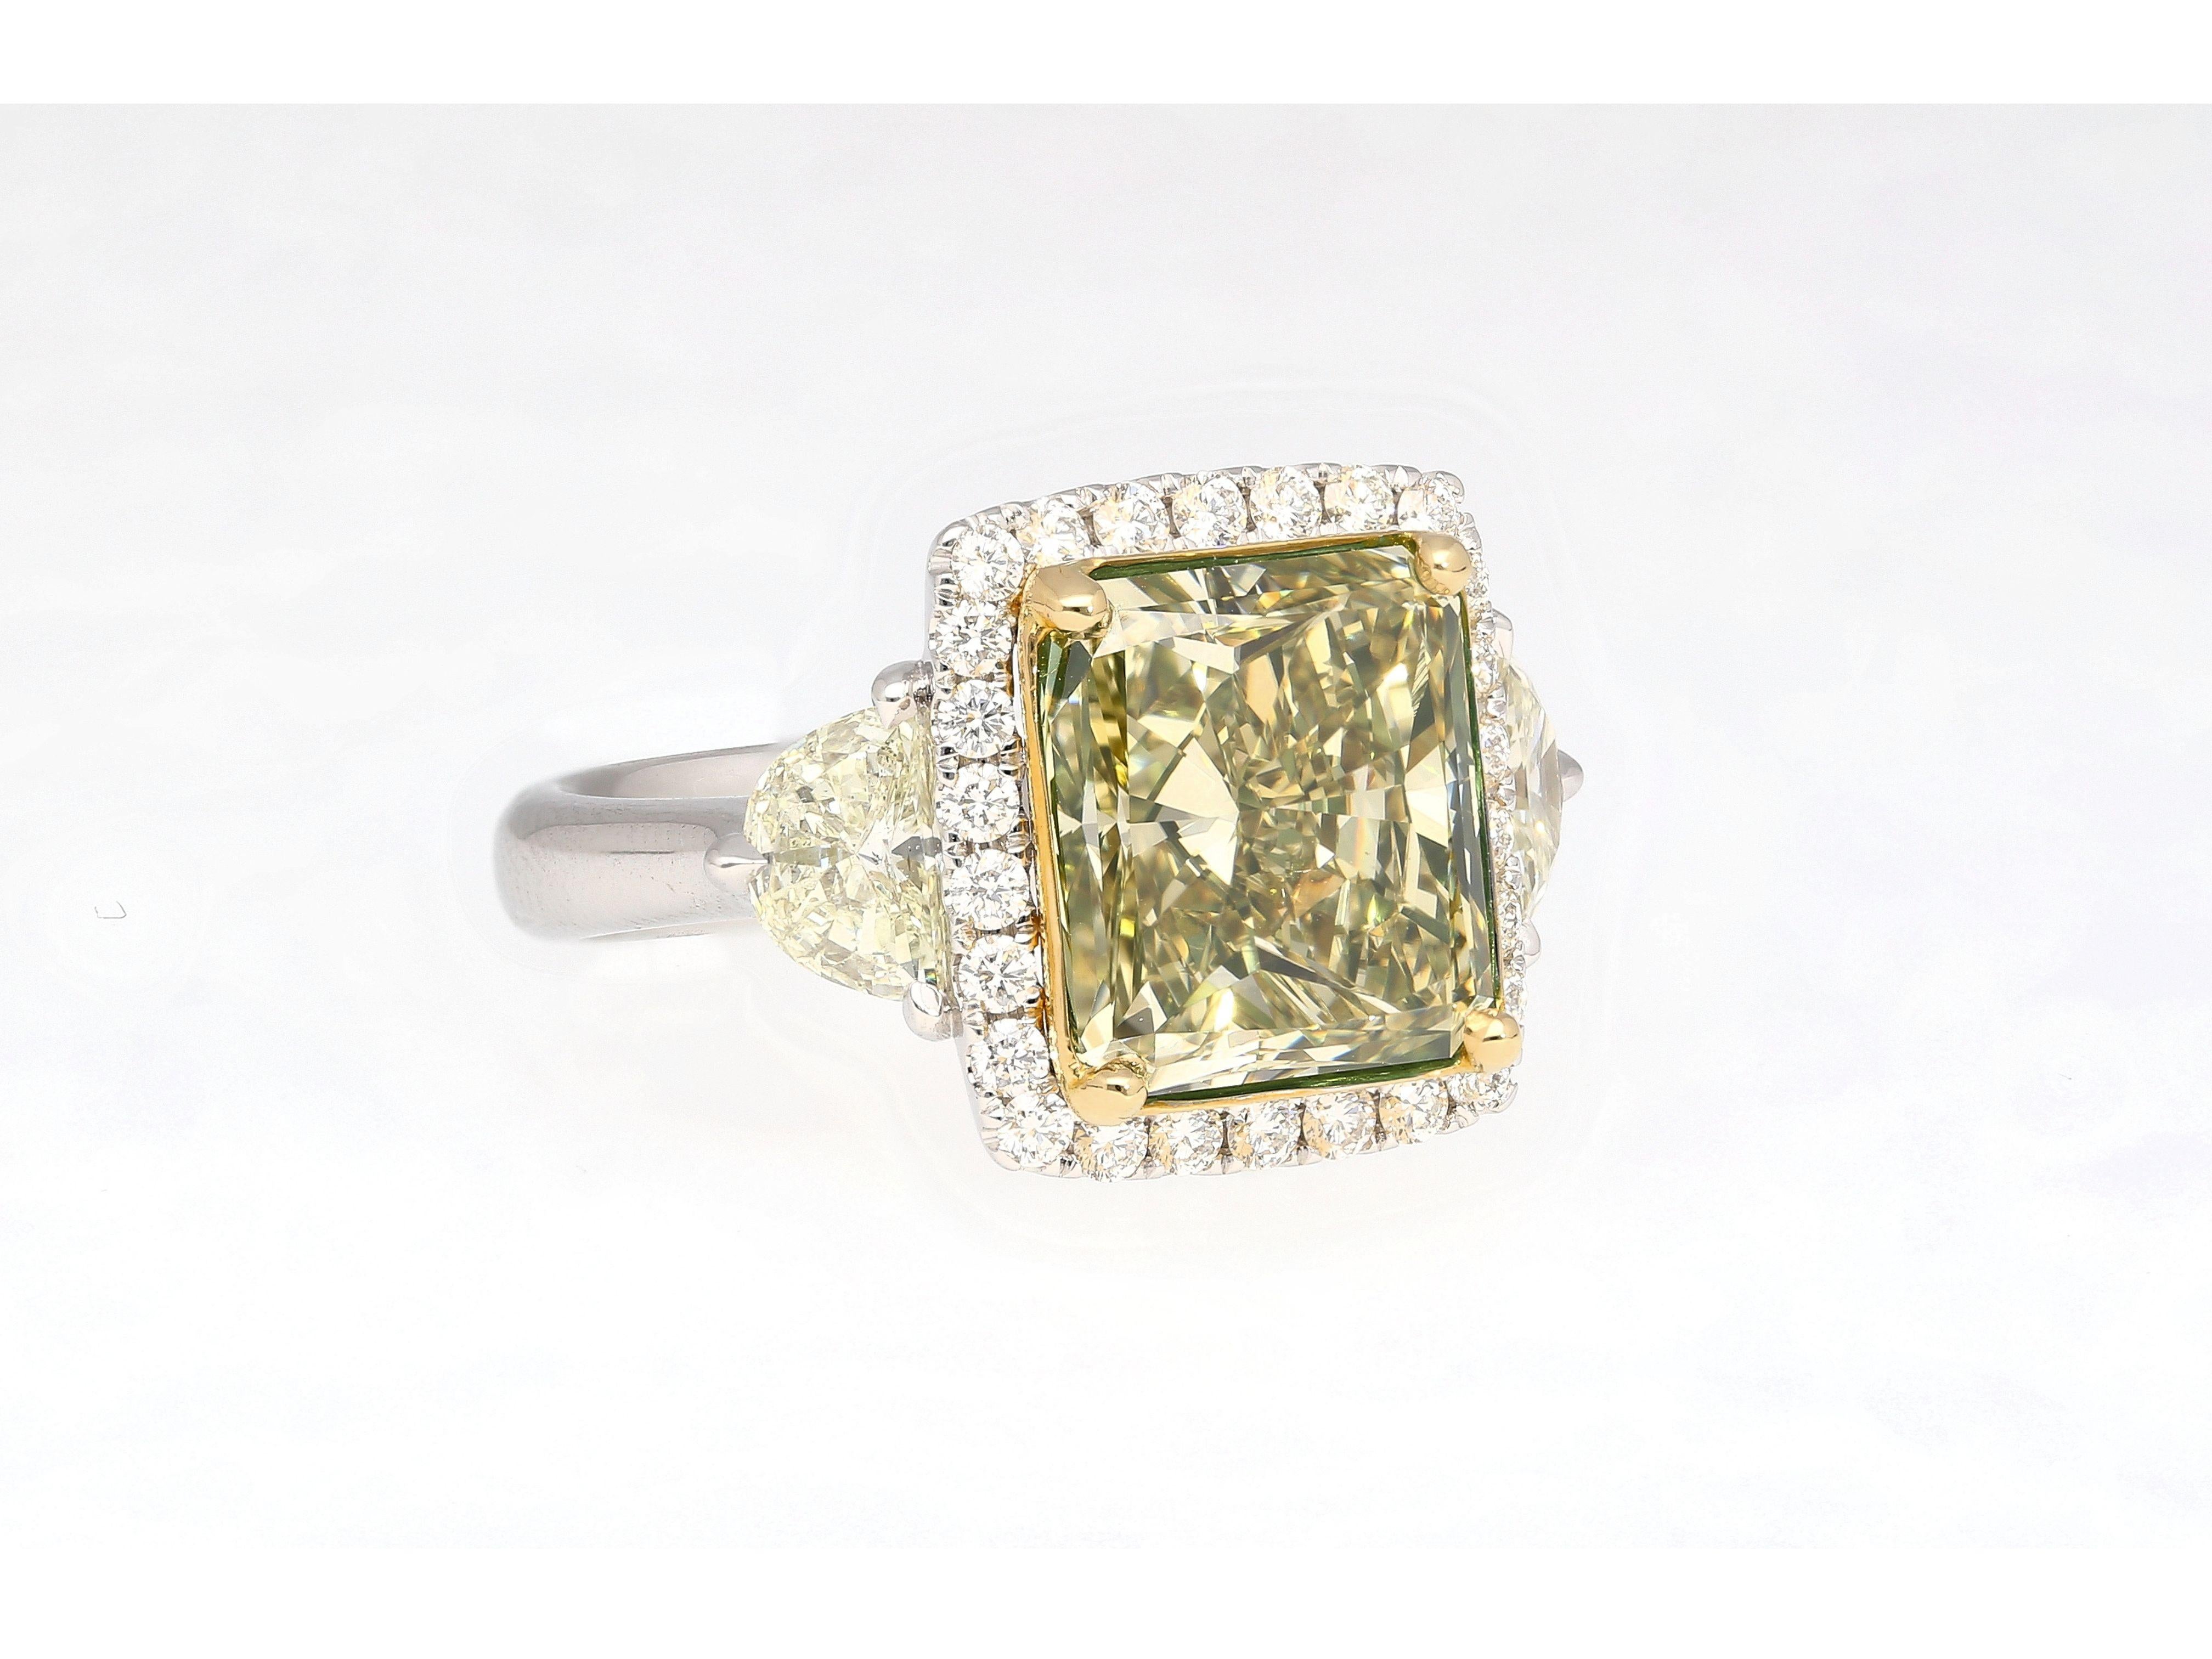 GIA certified 6.07 carat fancy brownish greenish yellow radiant cut diamond engagement ring. Set in 18k white and yellow gold. The ring features a round brilliant cut white diamond halo and pave set ring shank, yellow gold prongs, and an open back